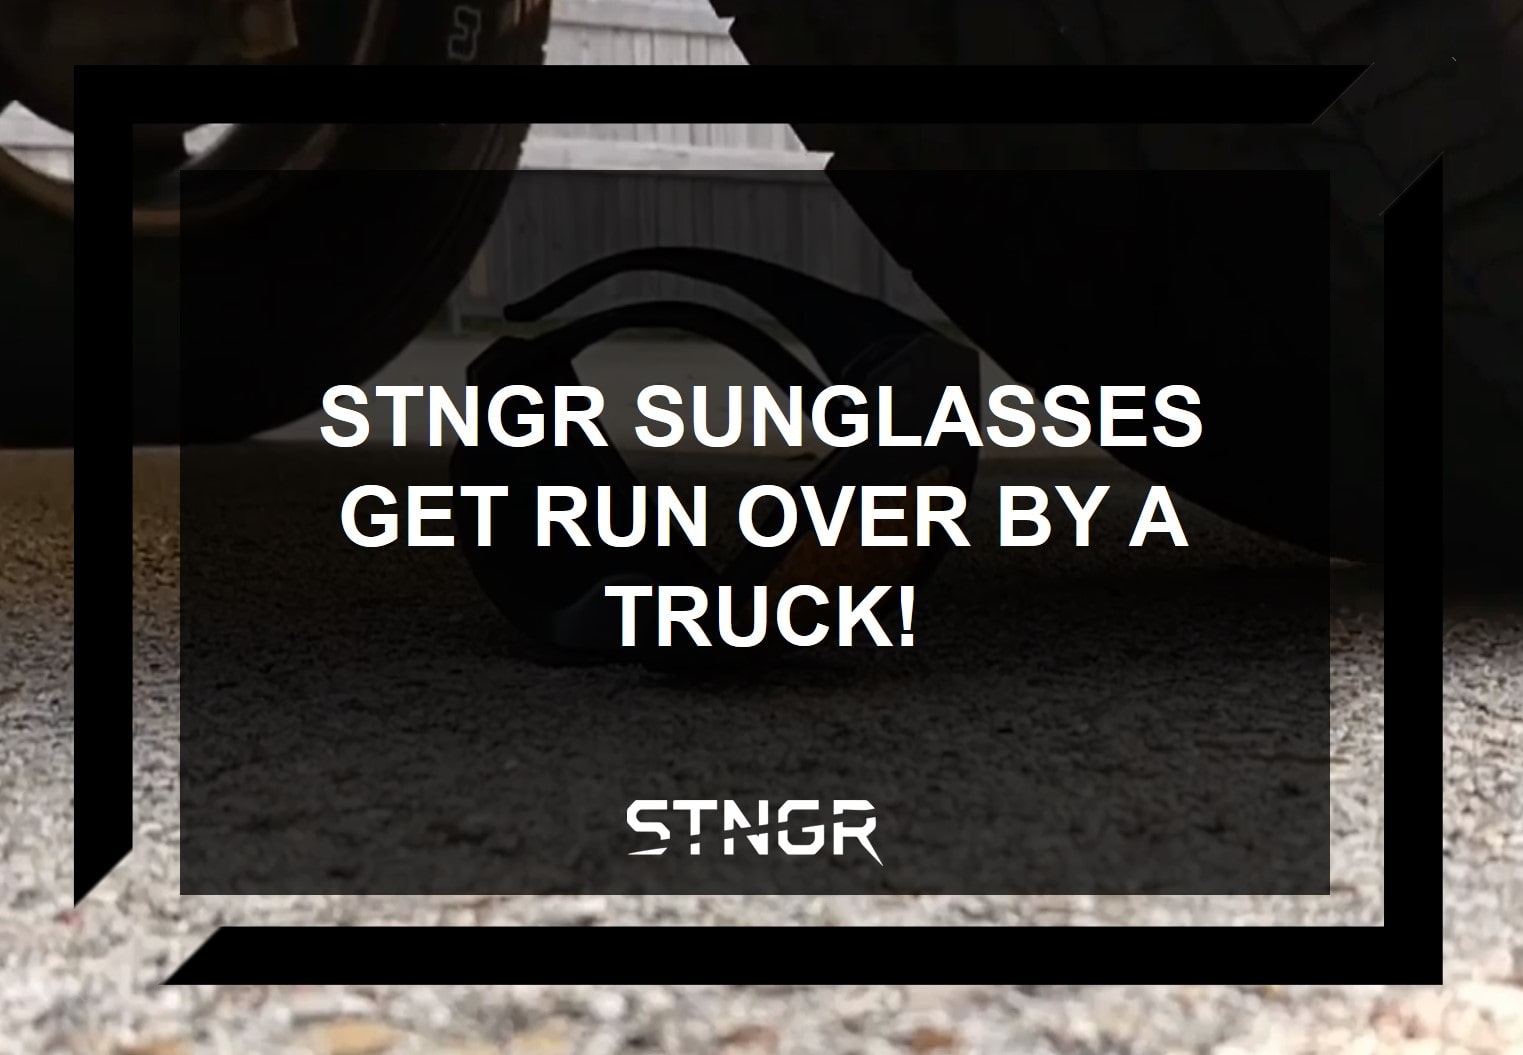 STNGR Sunglasses Get Run Over By A Truck!